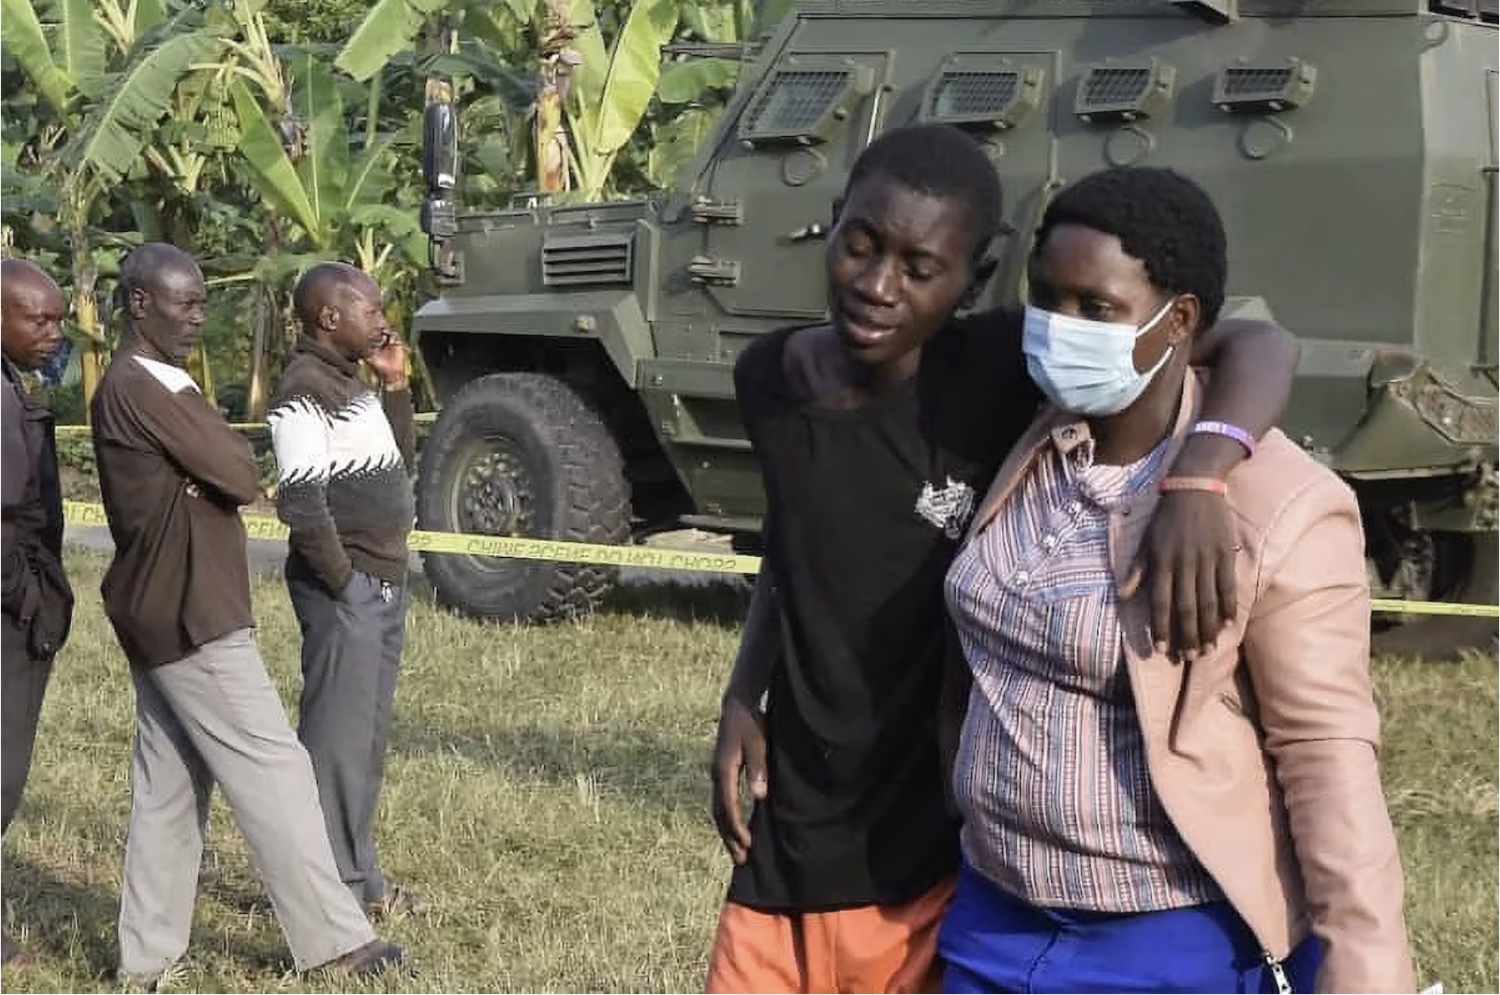 At least 37 killed in attack on school in Uganda, officials say